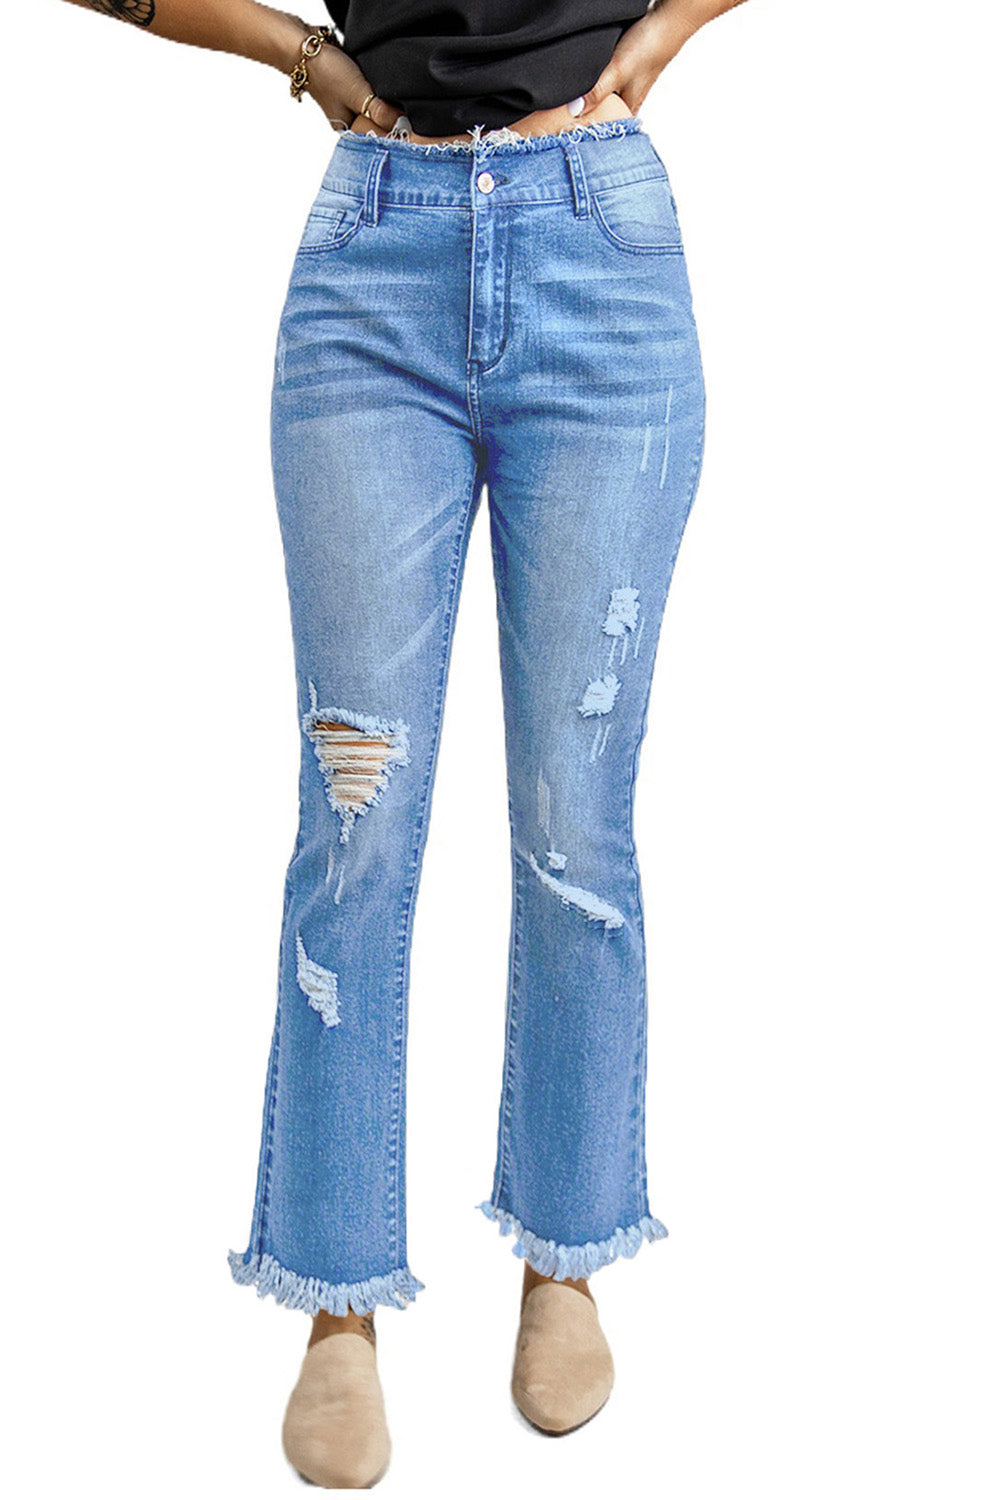 Sky Blue Frayed Ripped High Waist Flare Jeans Jeans JT's Designer Fashion